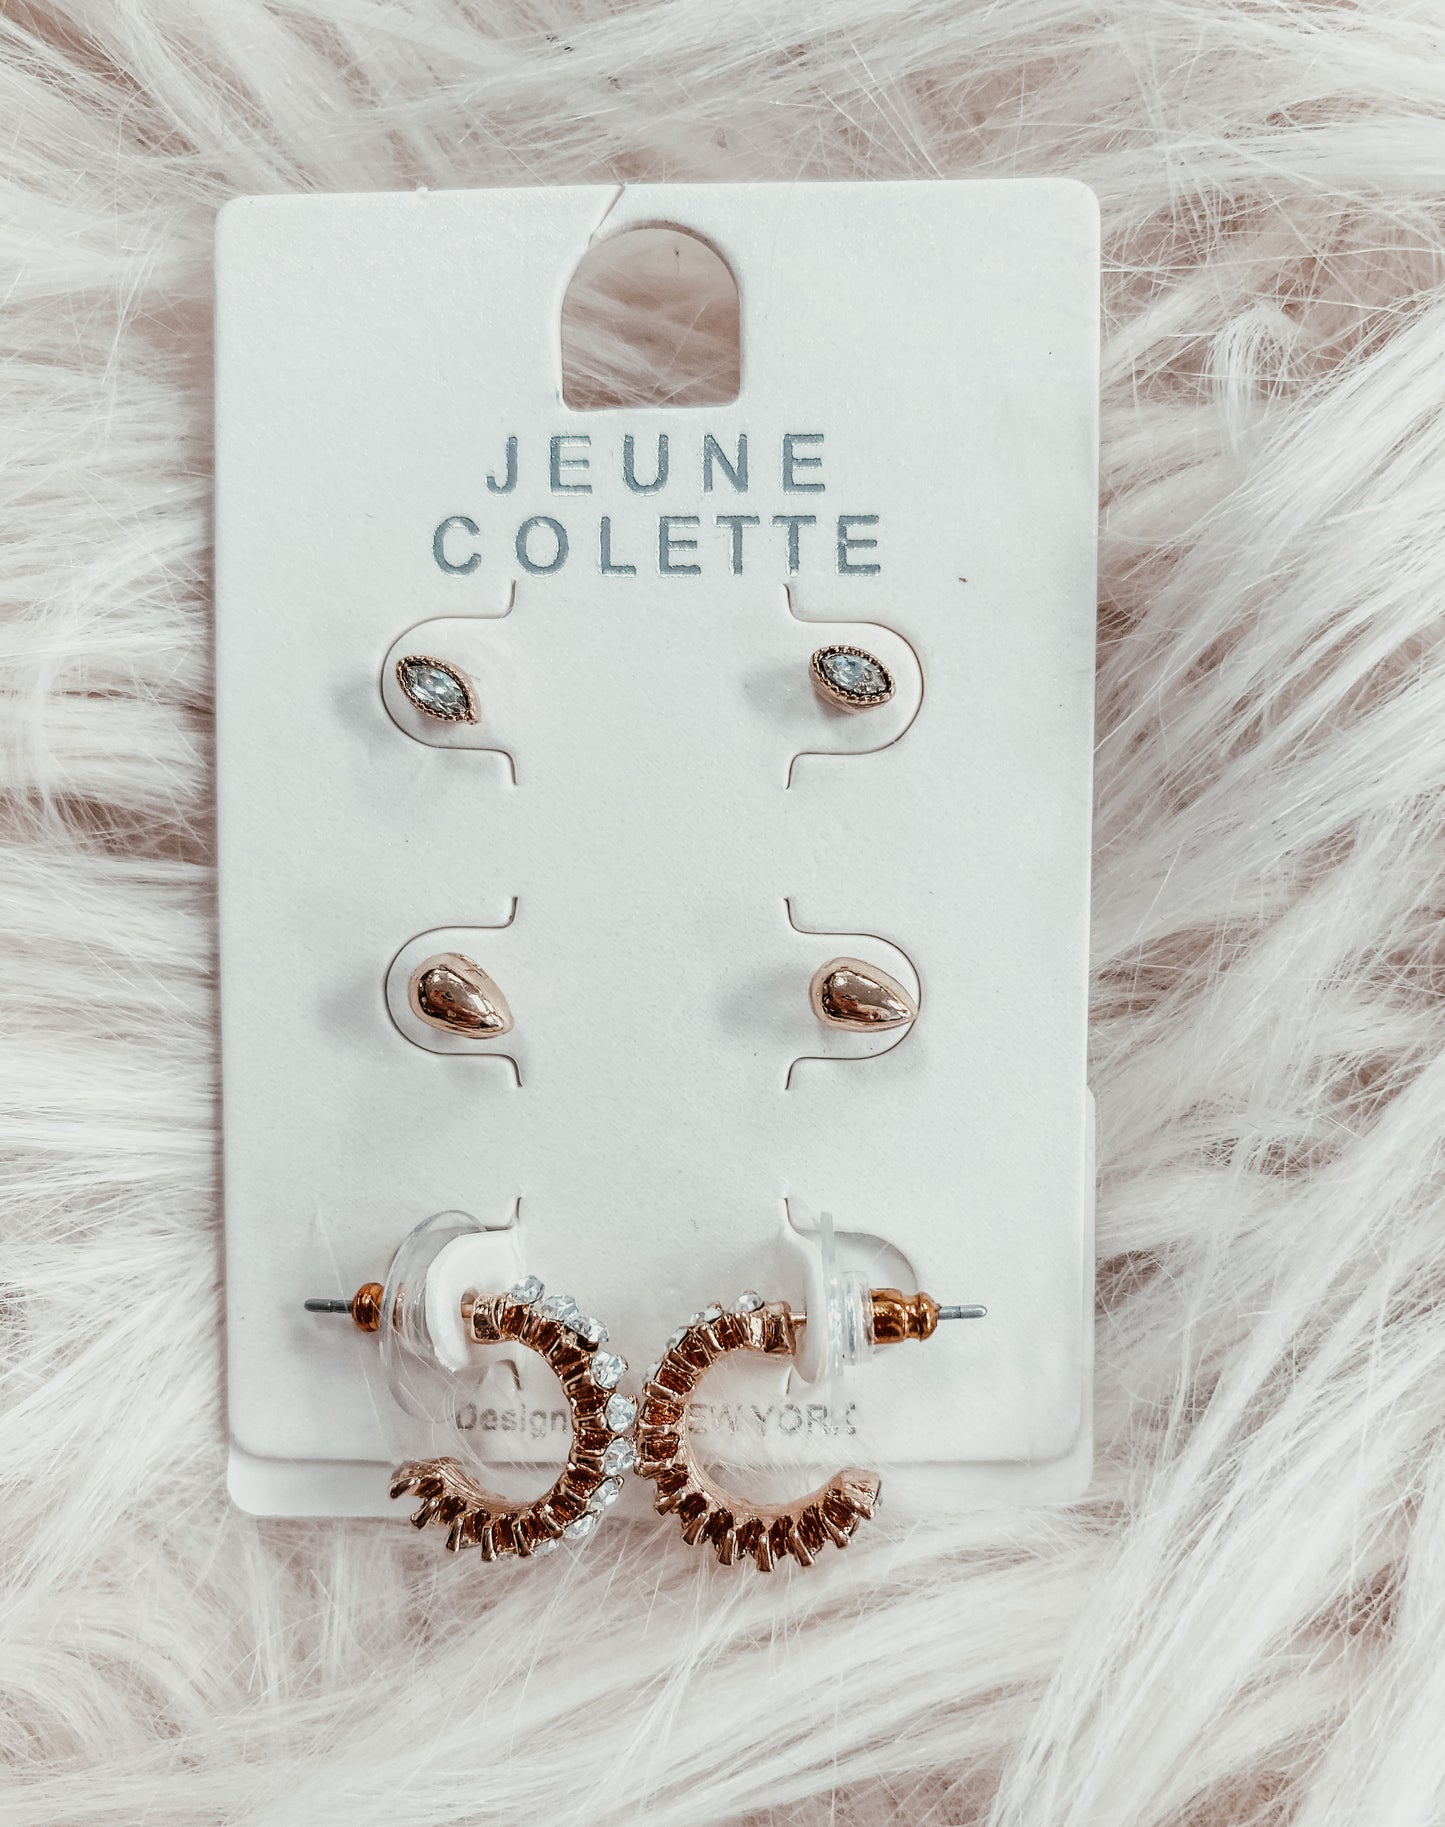 Small Business Earrings Stud Sets